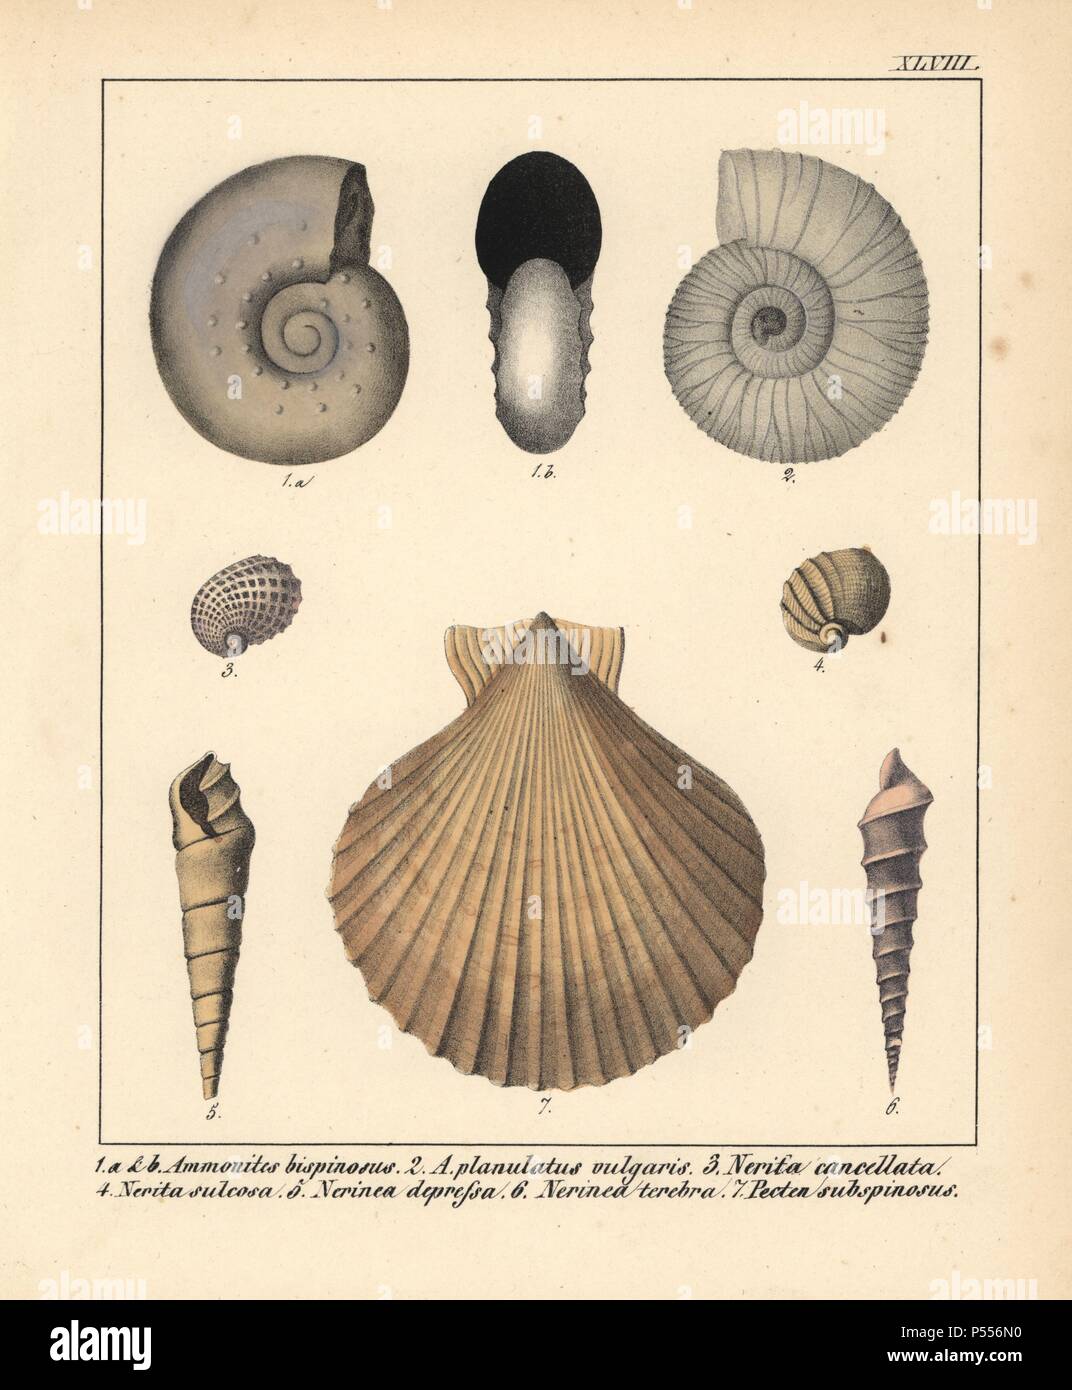 Ammonites bispinosus, A. planulatus vulgaris, Nerita cancellata, N. sulcosa, Nerinea depressa, Nerinea terebra and Pecten subspinosus. Handcoloured lithograph by an unknown artist from Dr. F.A. Schmidt's 'Petrefactenbuch,' published in Stuttgart, Germany, 1855 by Verlag von Krais & Hoffmann. Dr. Schmidt's 'Book of Petrification' introduced fossils and palaeontology to both the specialist and general reader. Stock Photo